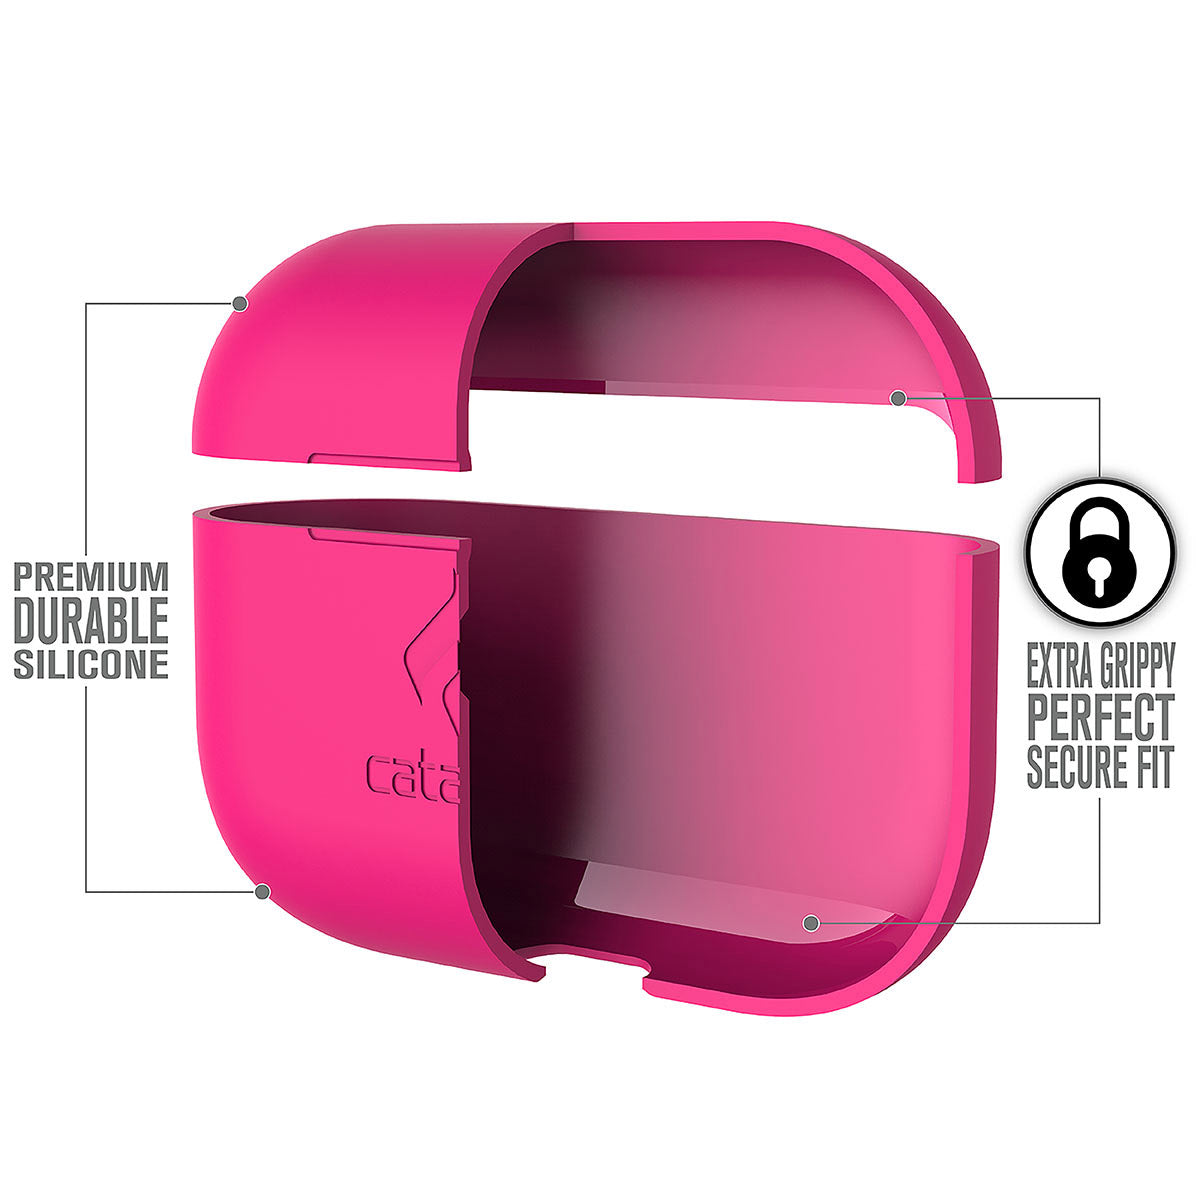 Catalyst airpods pro gen 2/1 slim case showing the case features in a neon pink colorway text reads premium durable silicone extra grippy perfect secure fit